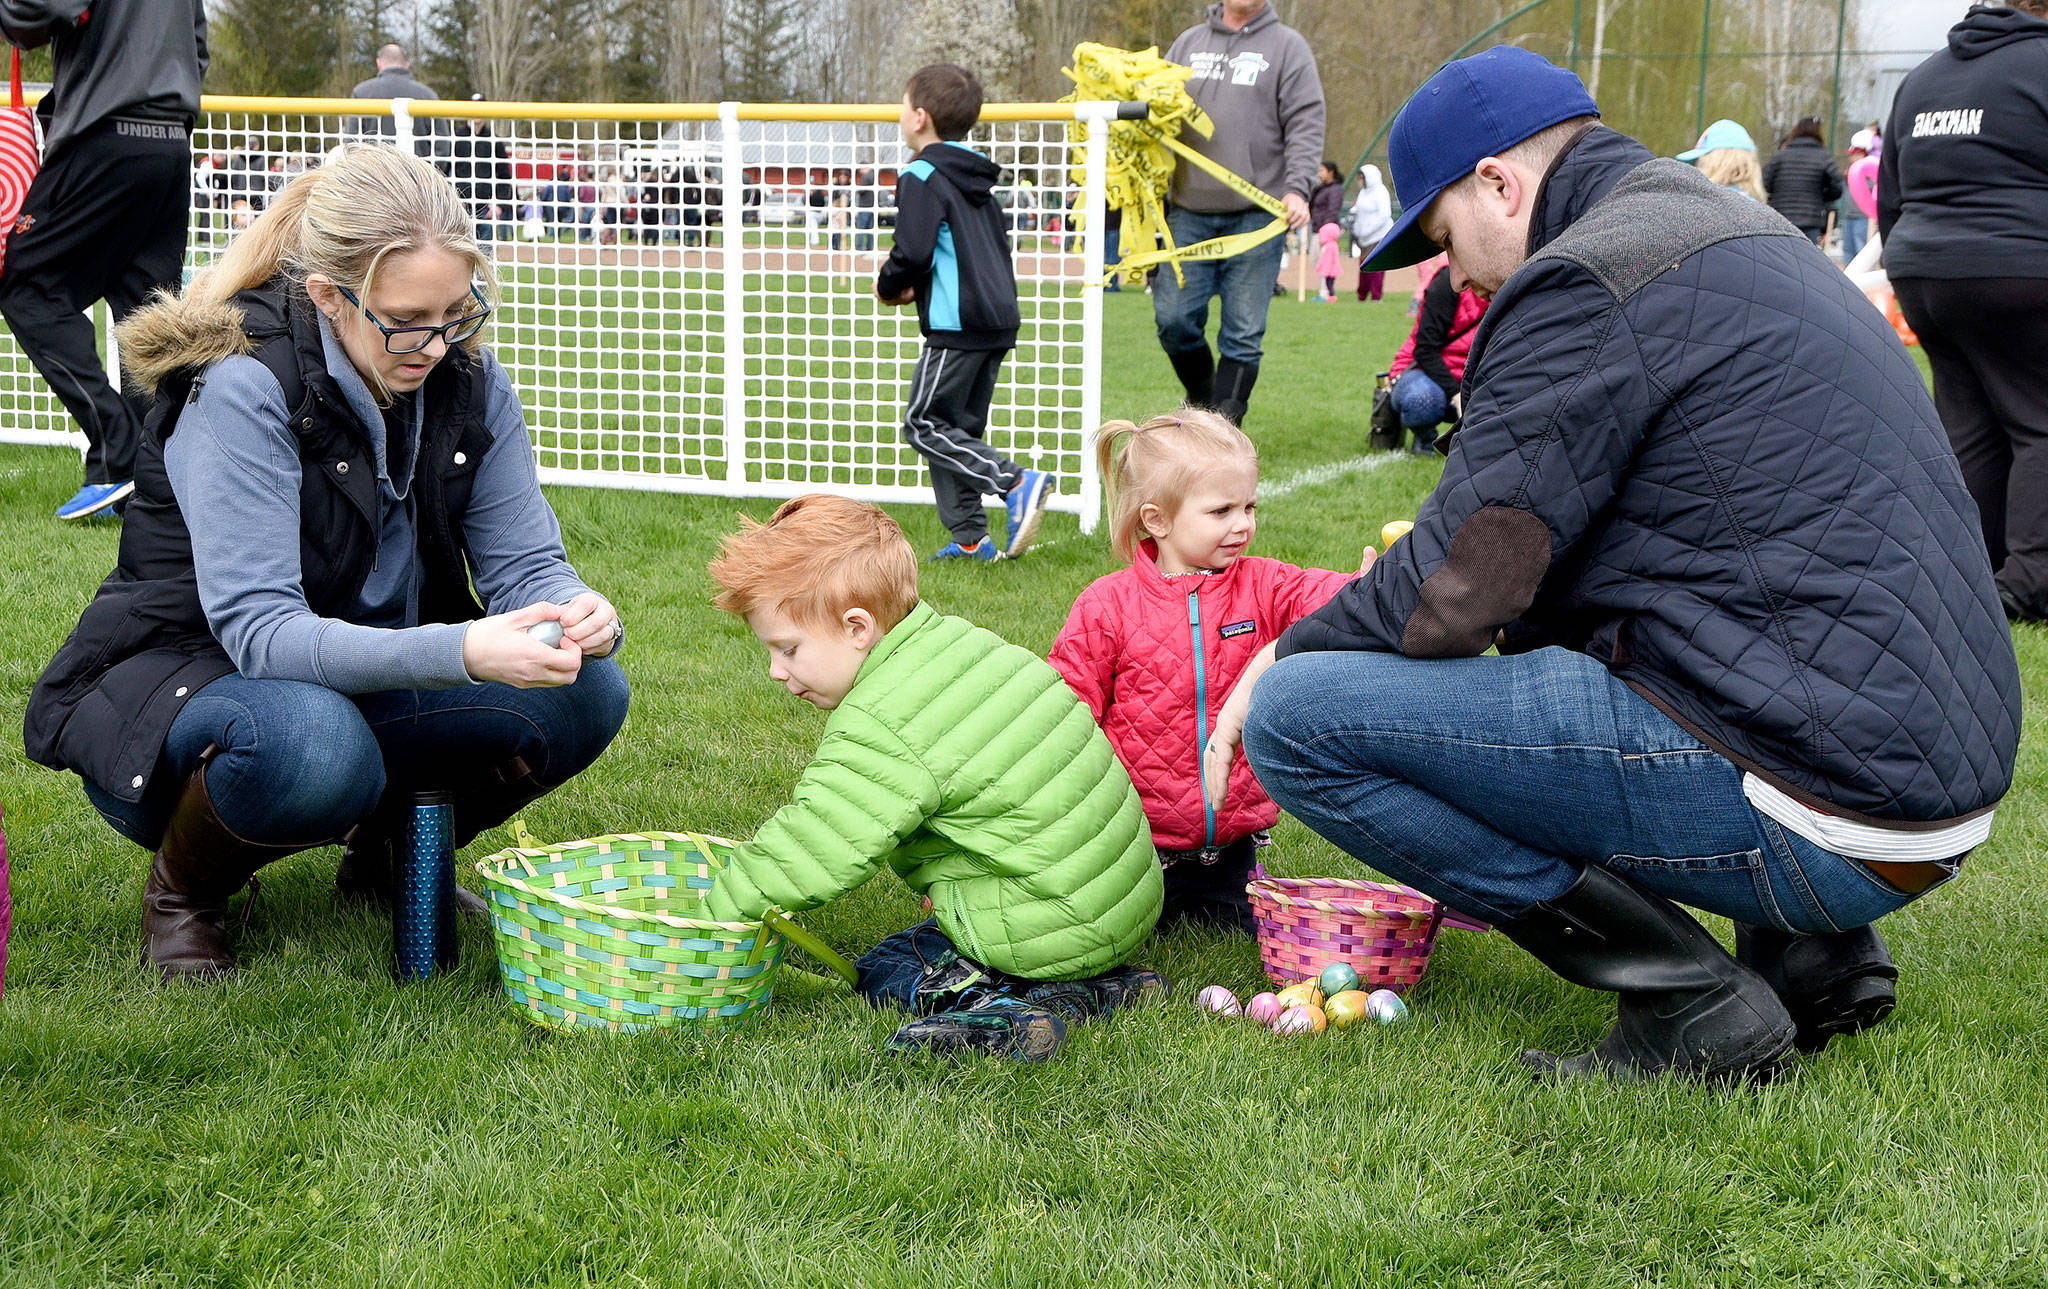 The Kimball family, Brittany, Tucker, age 4, Penelope, age 2 and Leland, had a successful egg hunt, with many eggs to crack open after all the excitement. Carol Ladwig/Staff Photo